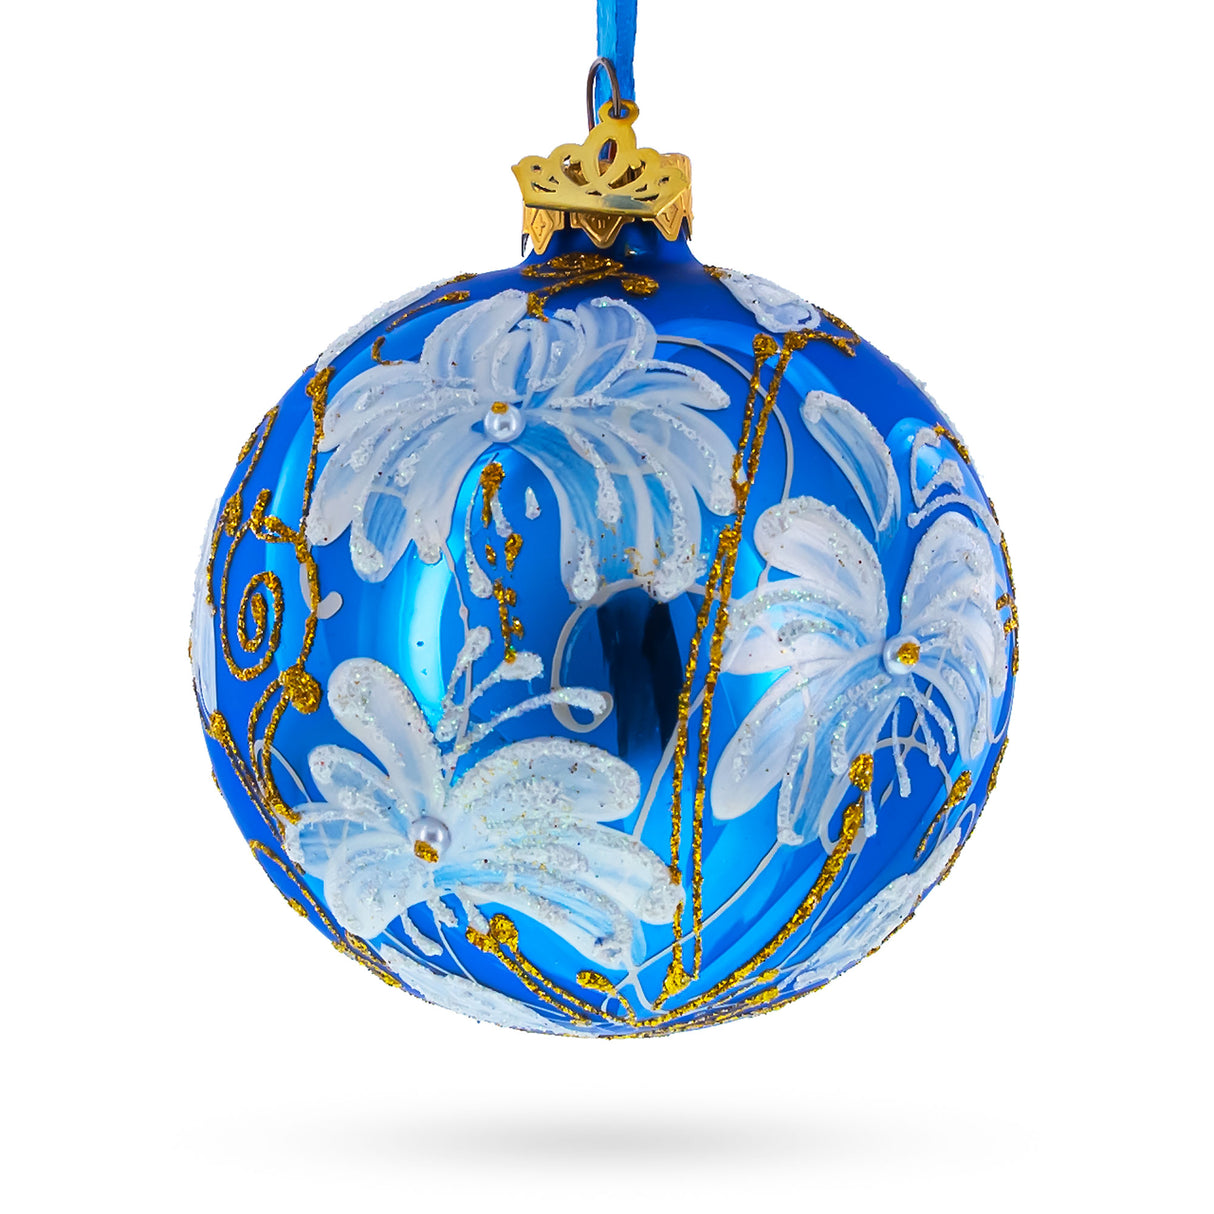 White Lilies Flowers Glass Ball Ornament in Blue color, Round shape